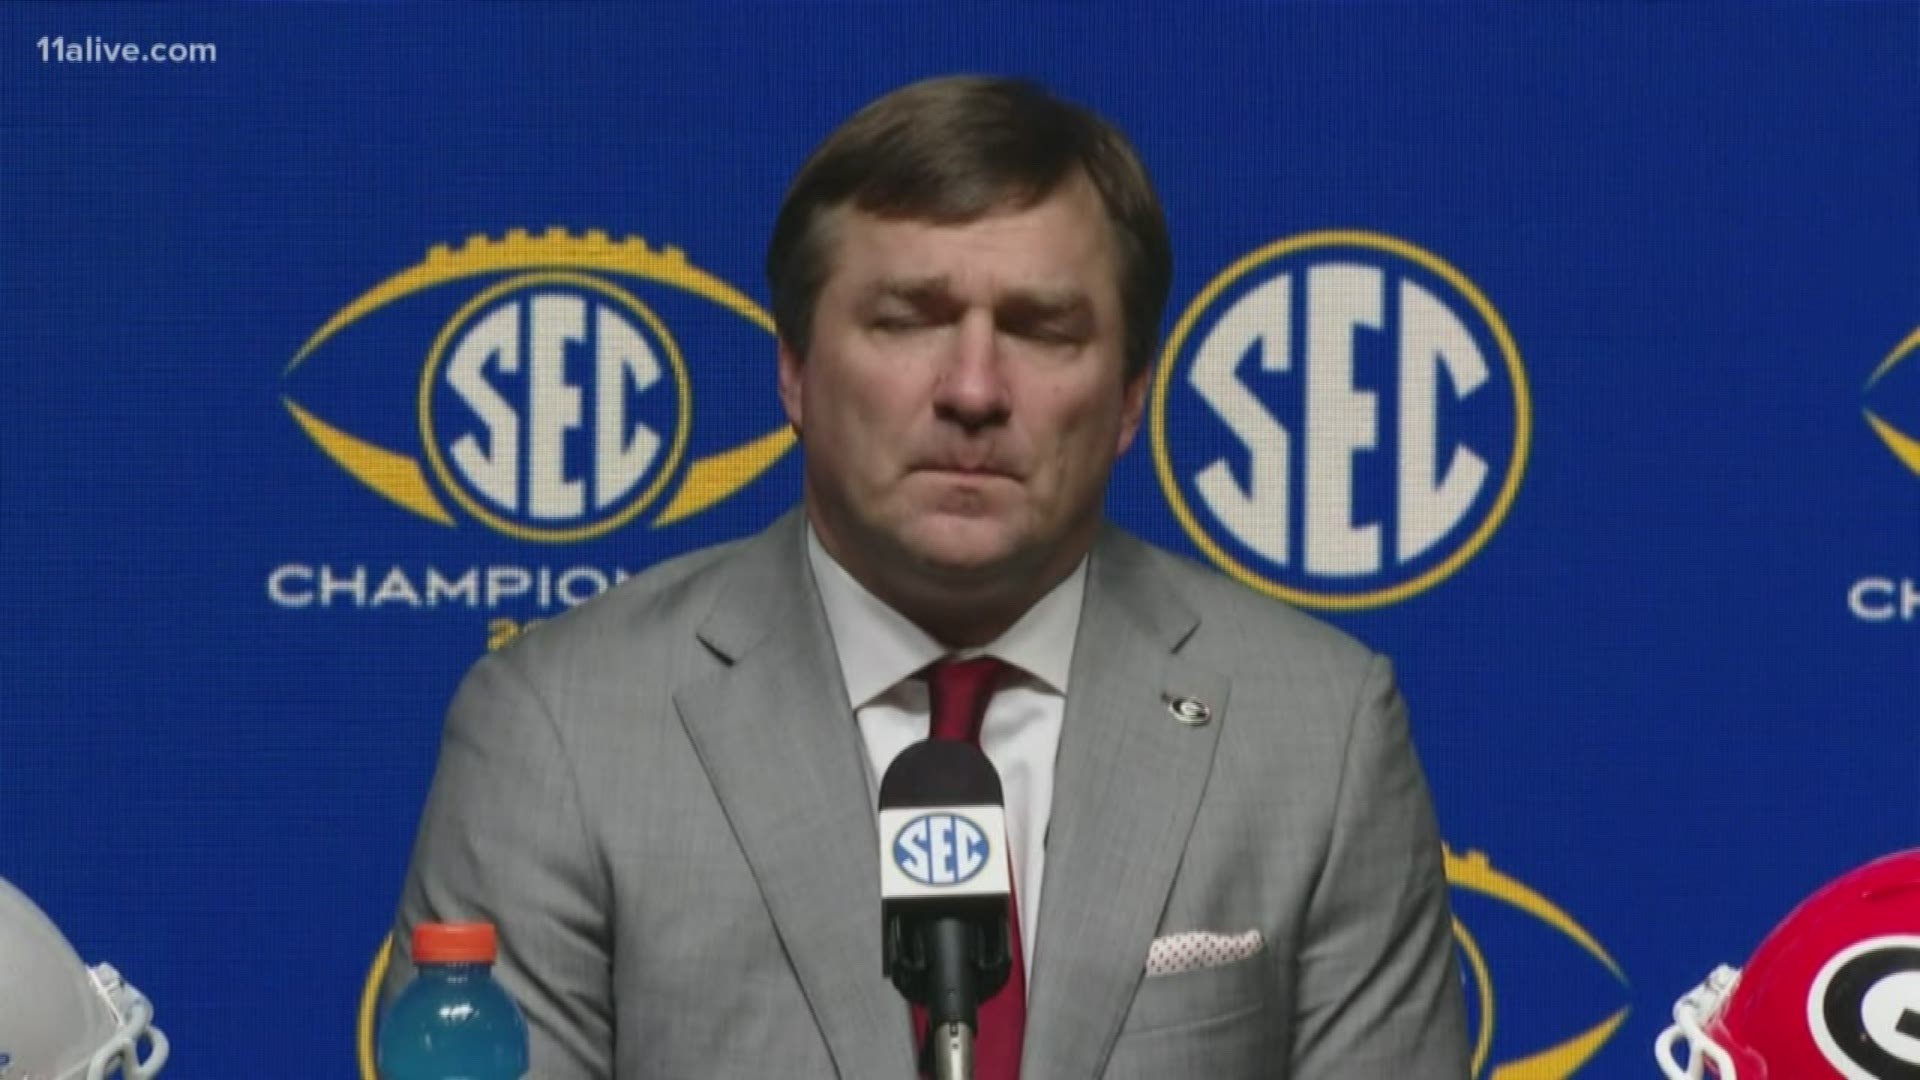 Kirby Smarts talks to the media before the SEC Championship game in Atlanta. The Georgia Bulldogs face the LSU Tigers.